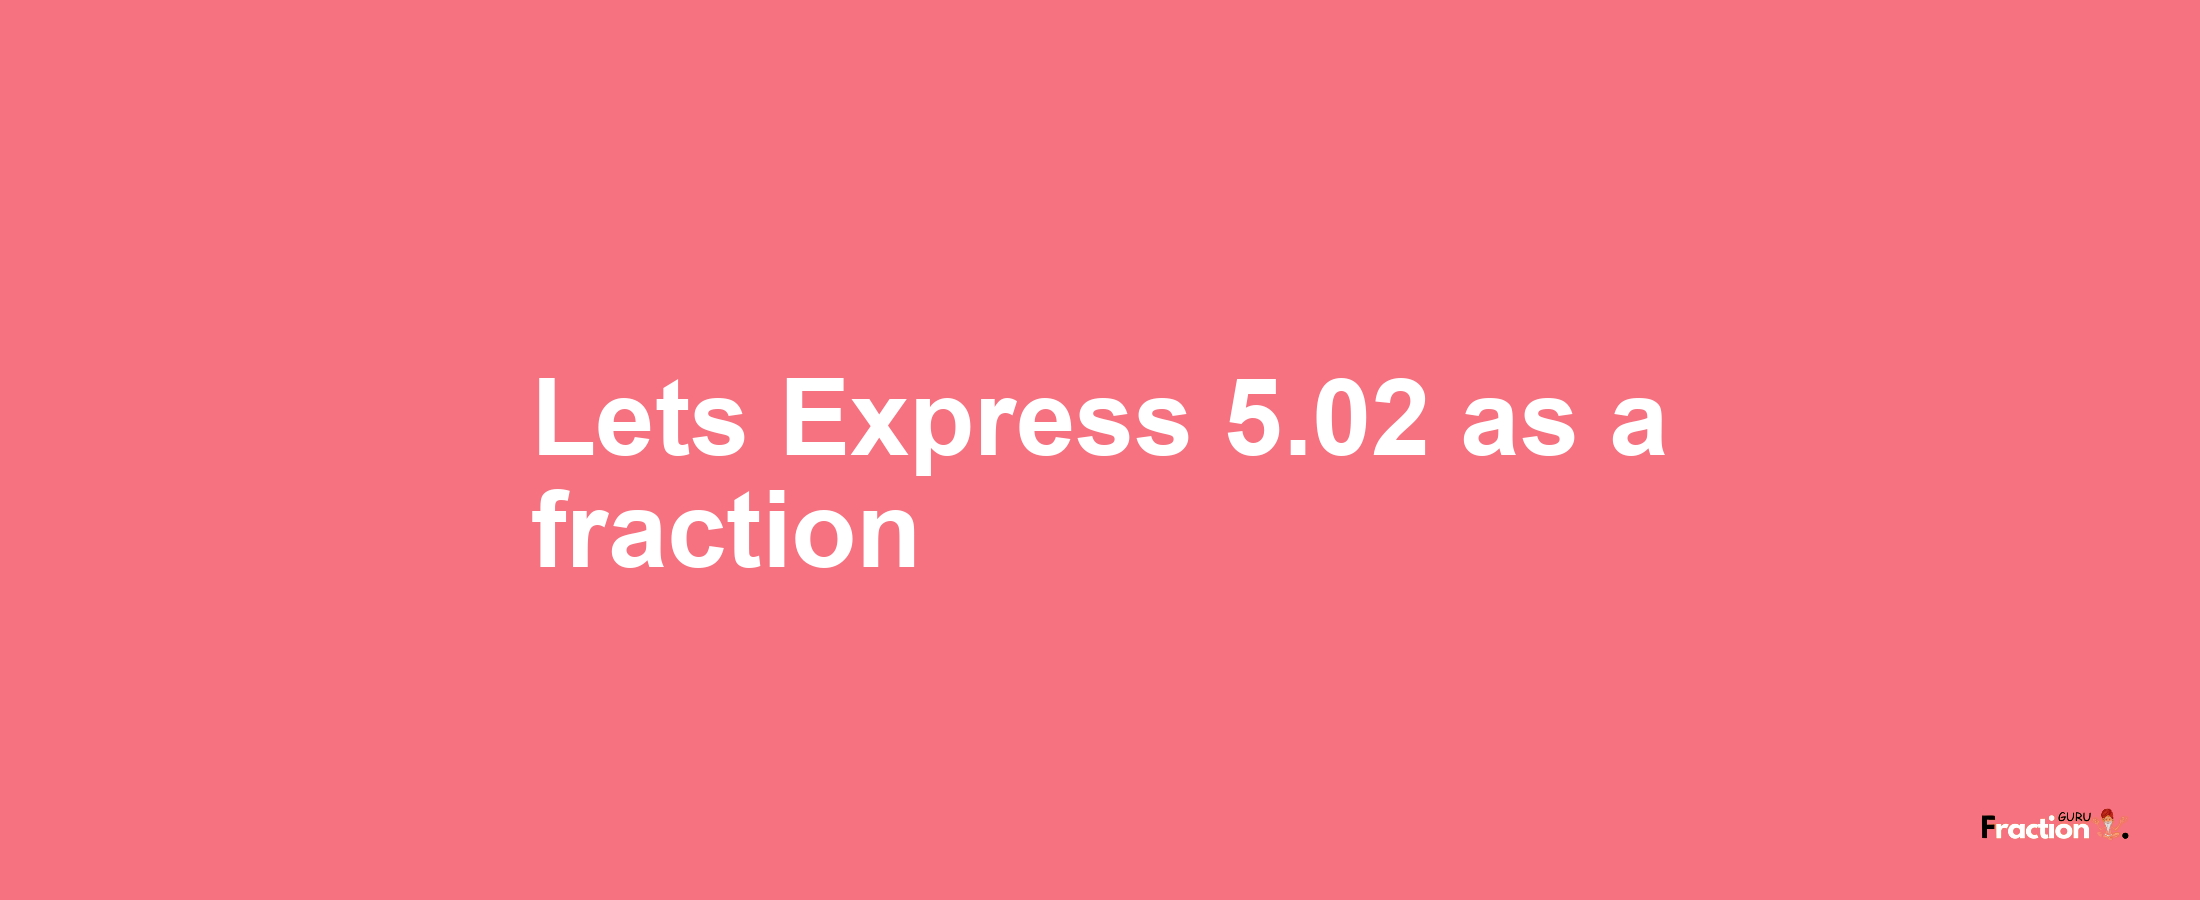 Lets Express 5.02 as afraction